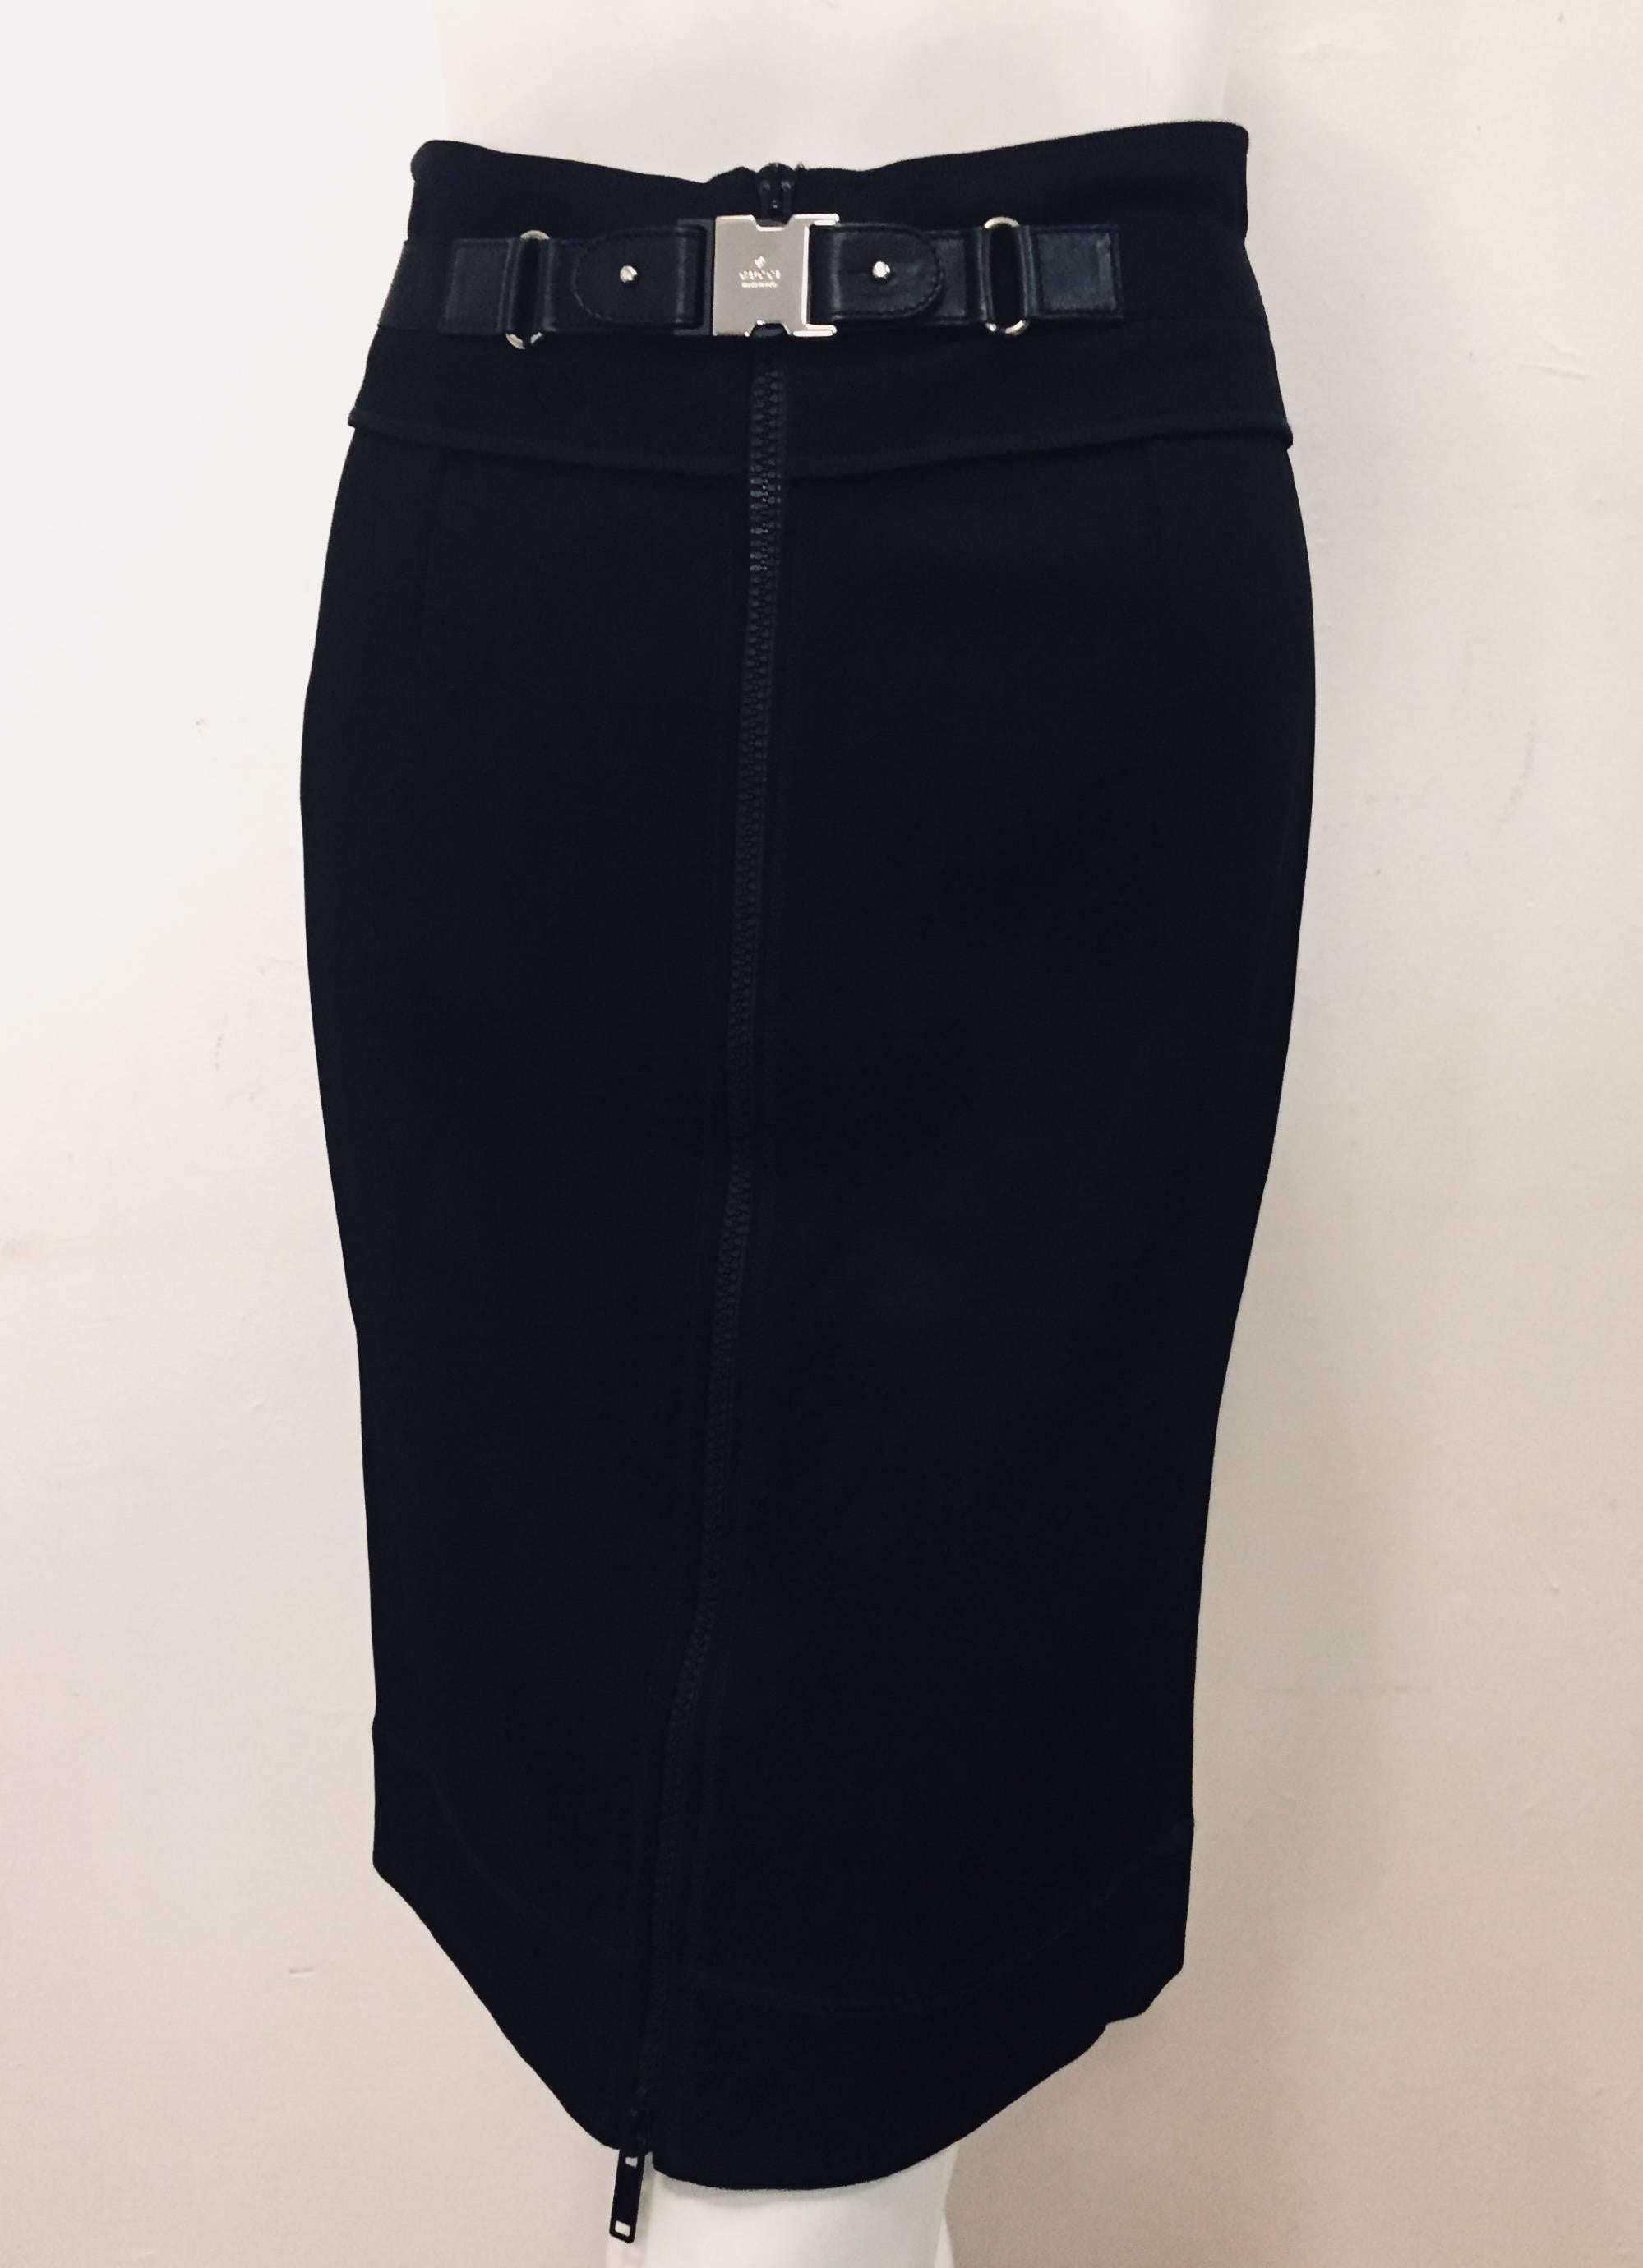 Gucci black silk blend pencil skirt with elasthane for added stretch and comfort. This Gucci trendy pencil skirt features a waist to hem black plastic zipper and slider.    The hem and zipper has bold top stitching around them for added flare.  The